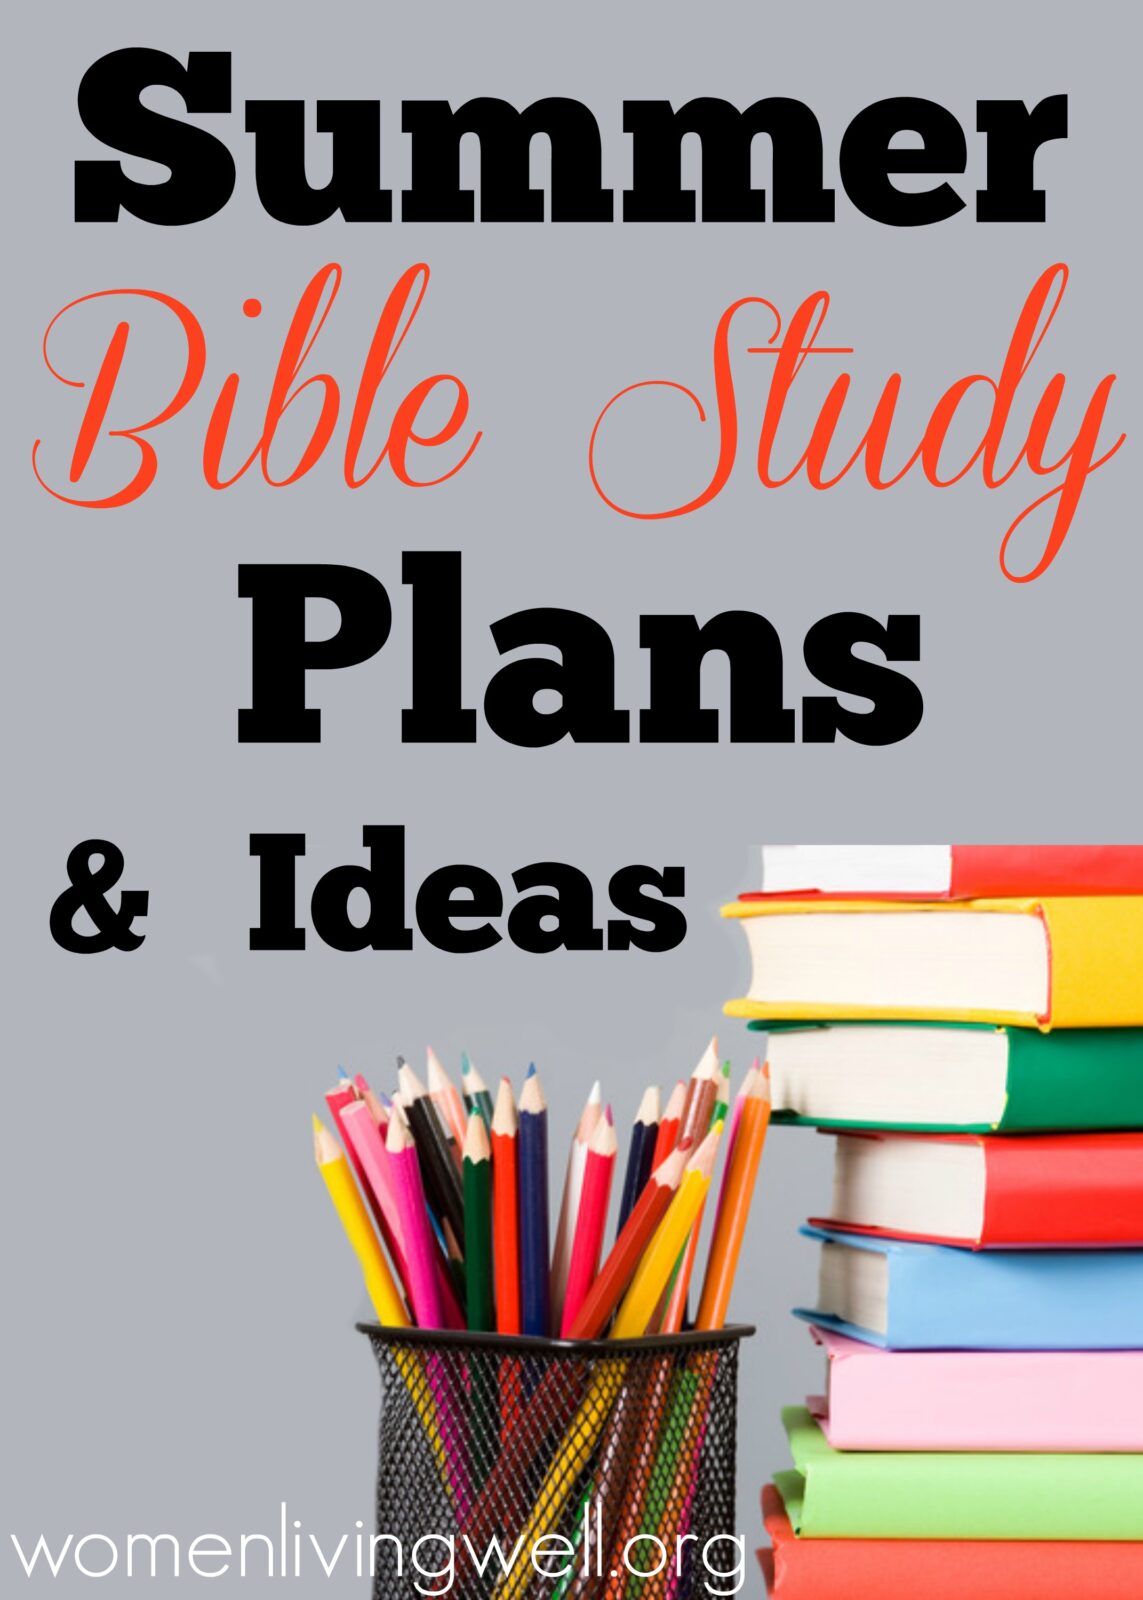 Summer Bible Study Plans and Ideas